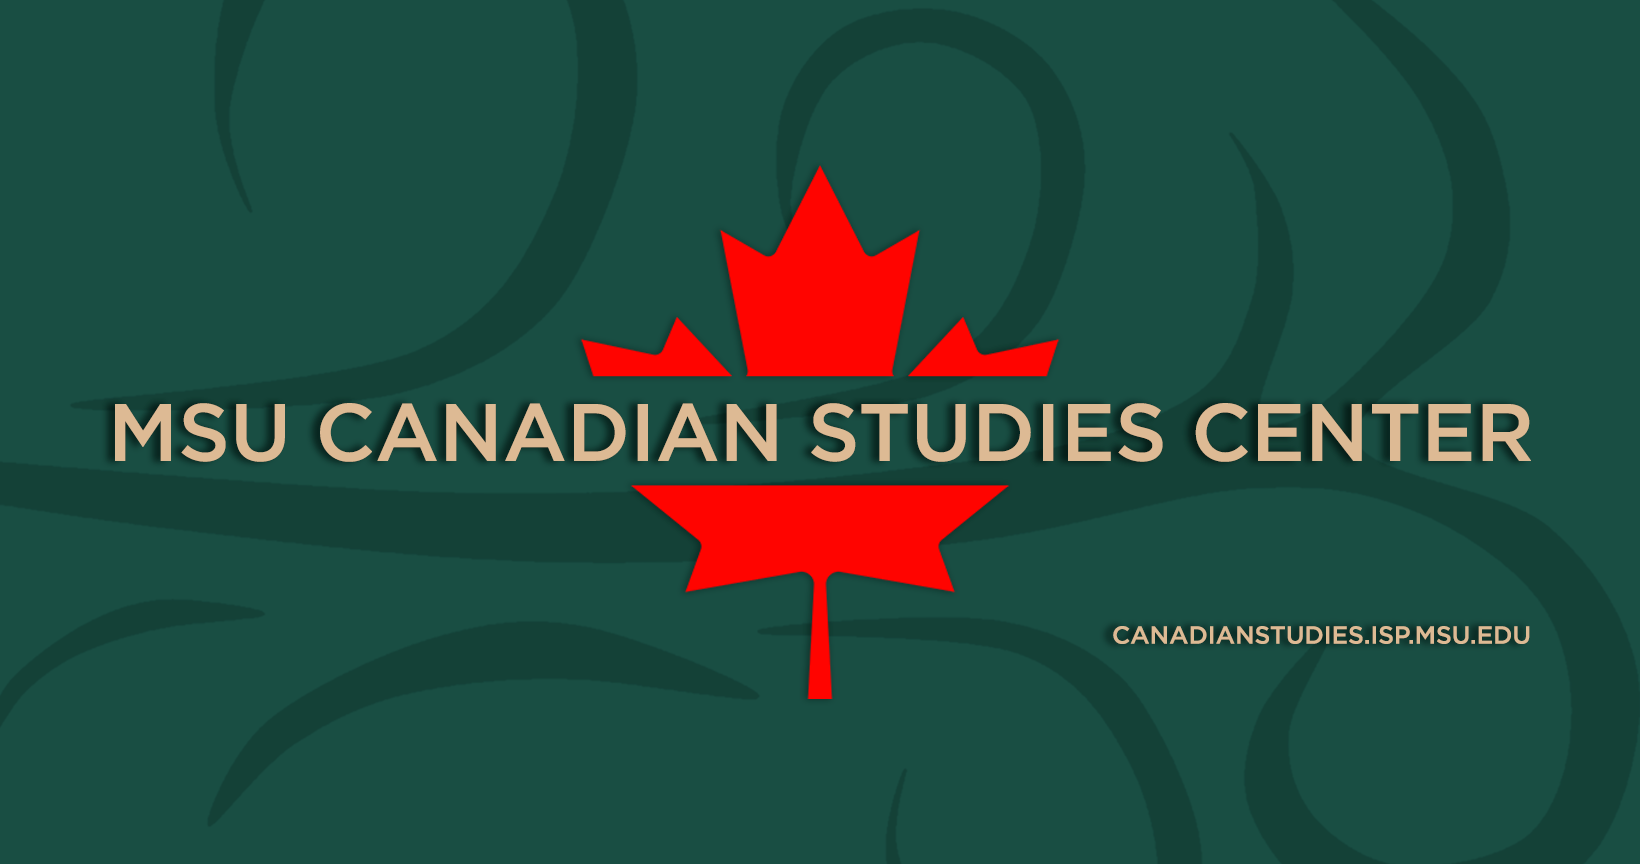 MSU Canadian Studies Center logo with green background and red maple leaf at center, canadianstudies.isp.msu.edu